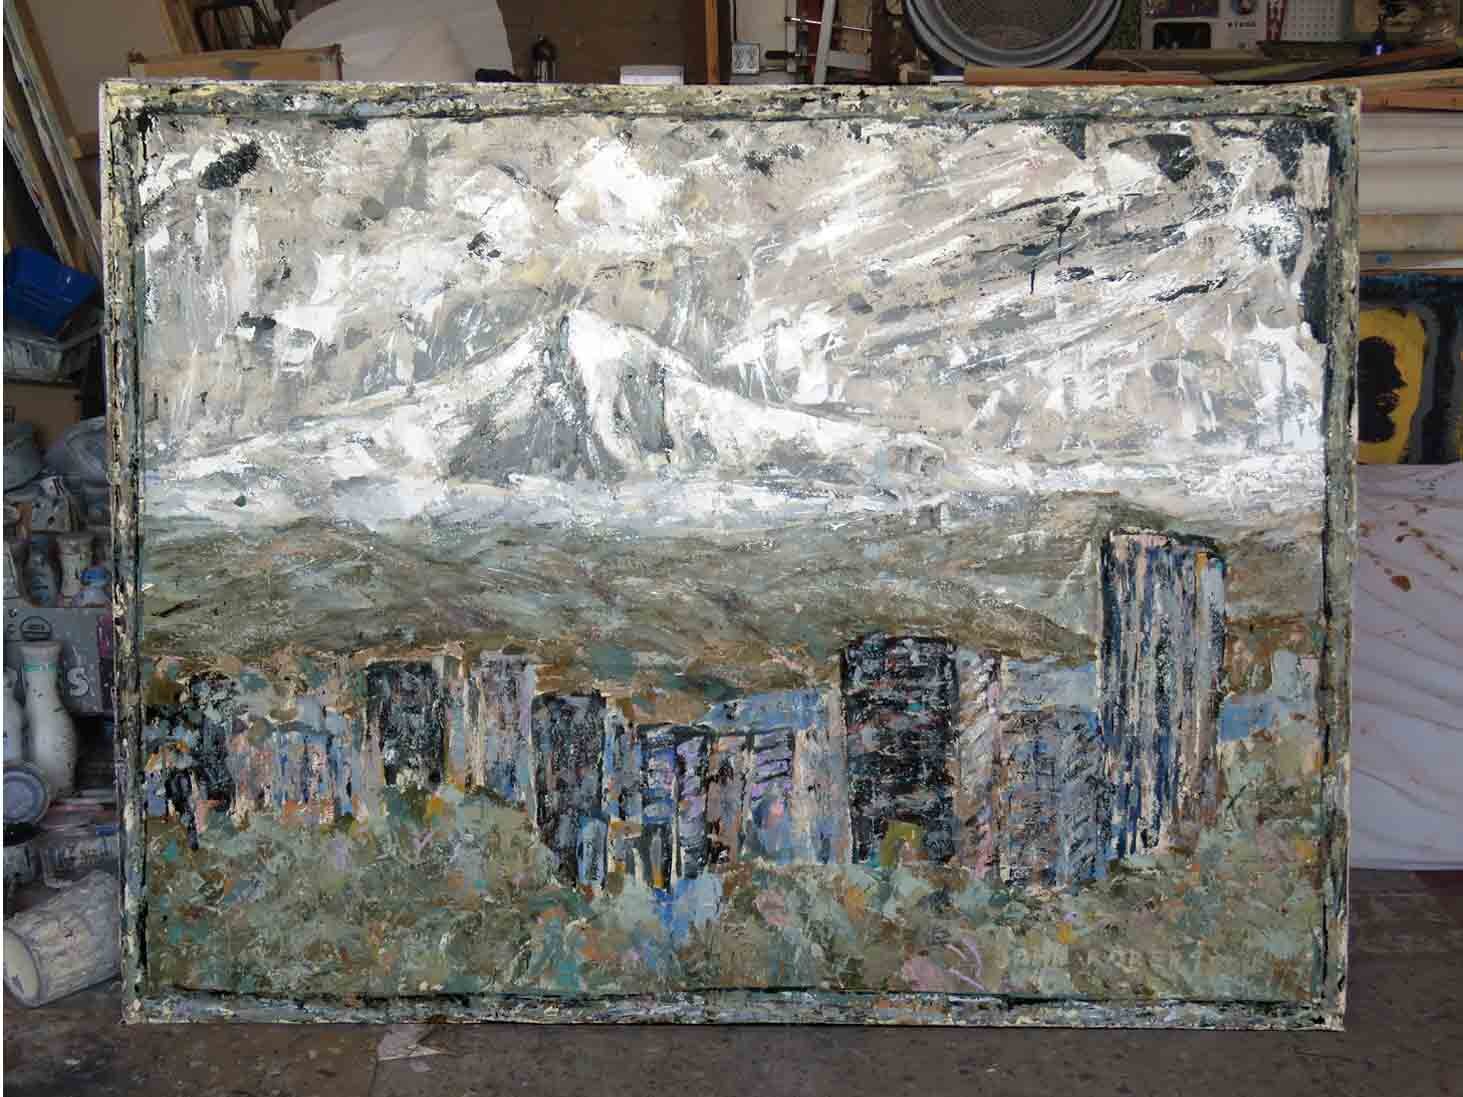 My Hood 5 ft by 6 ft acrylic on unstretched canvas